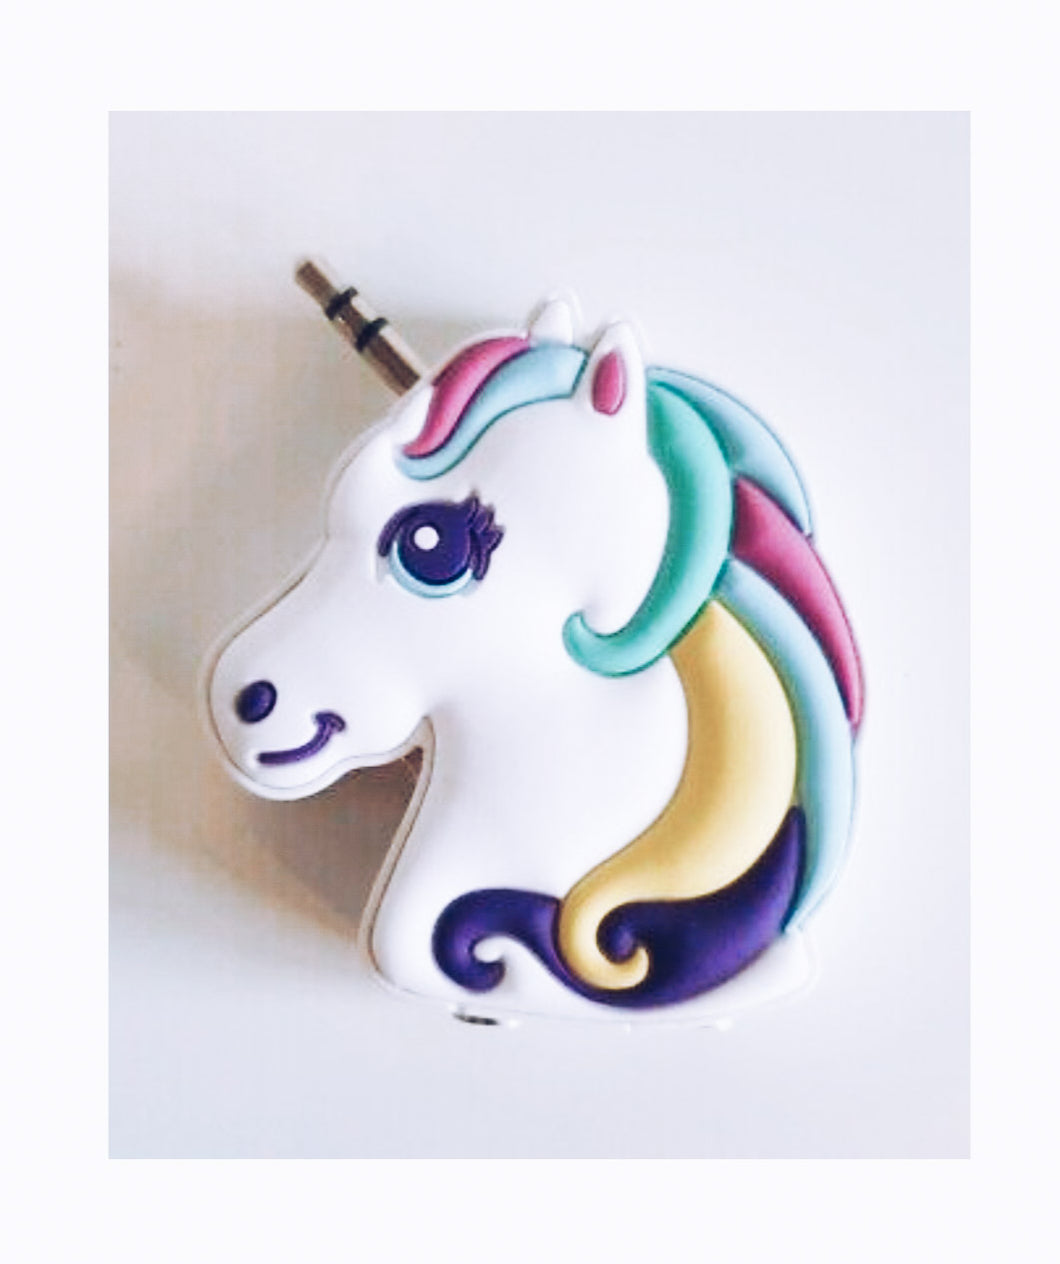 Earphone splitter 3.5mm jack lovely and colorful unicorn design - portable and useful! I-Tech accessories and gift ideas Take it with you and your mobile phone!